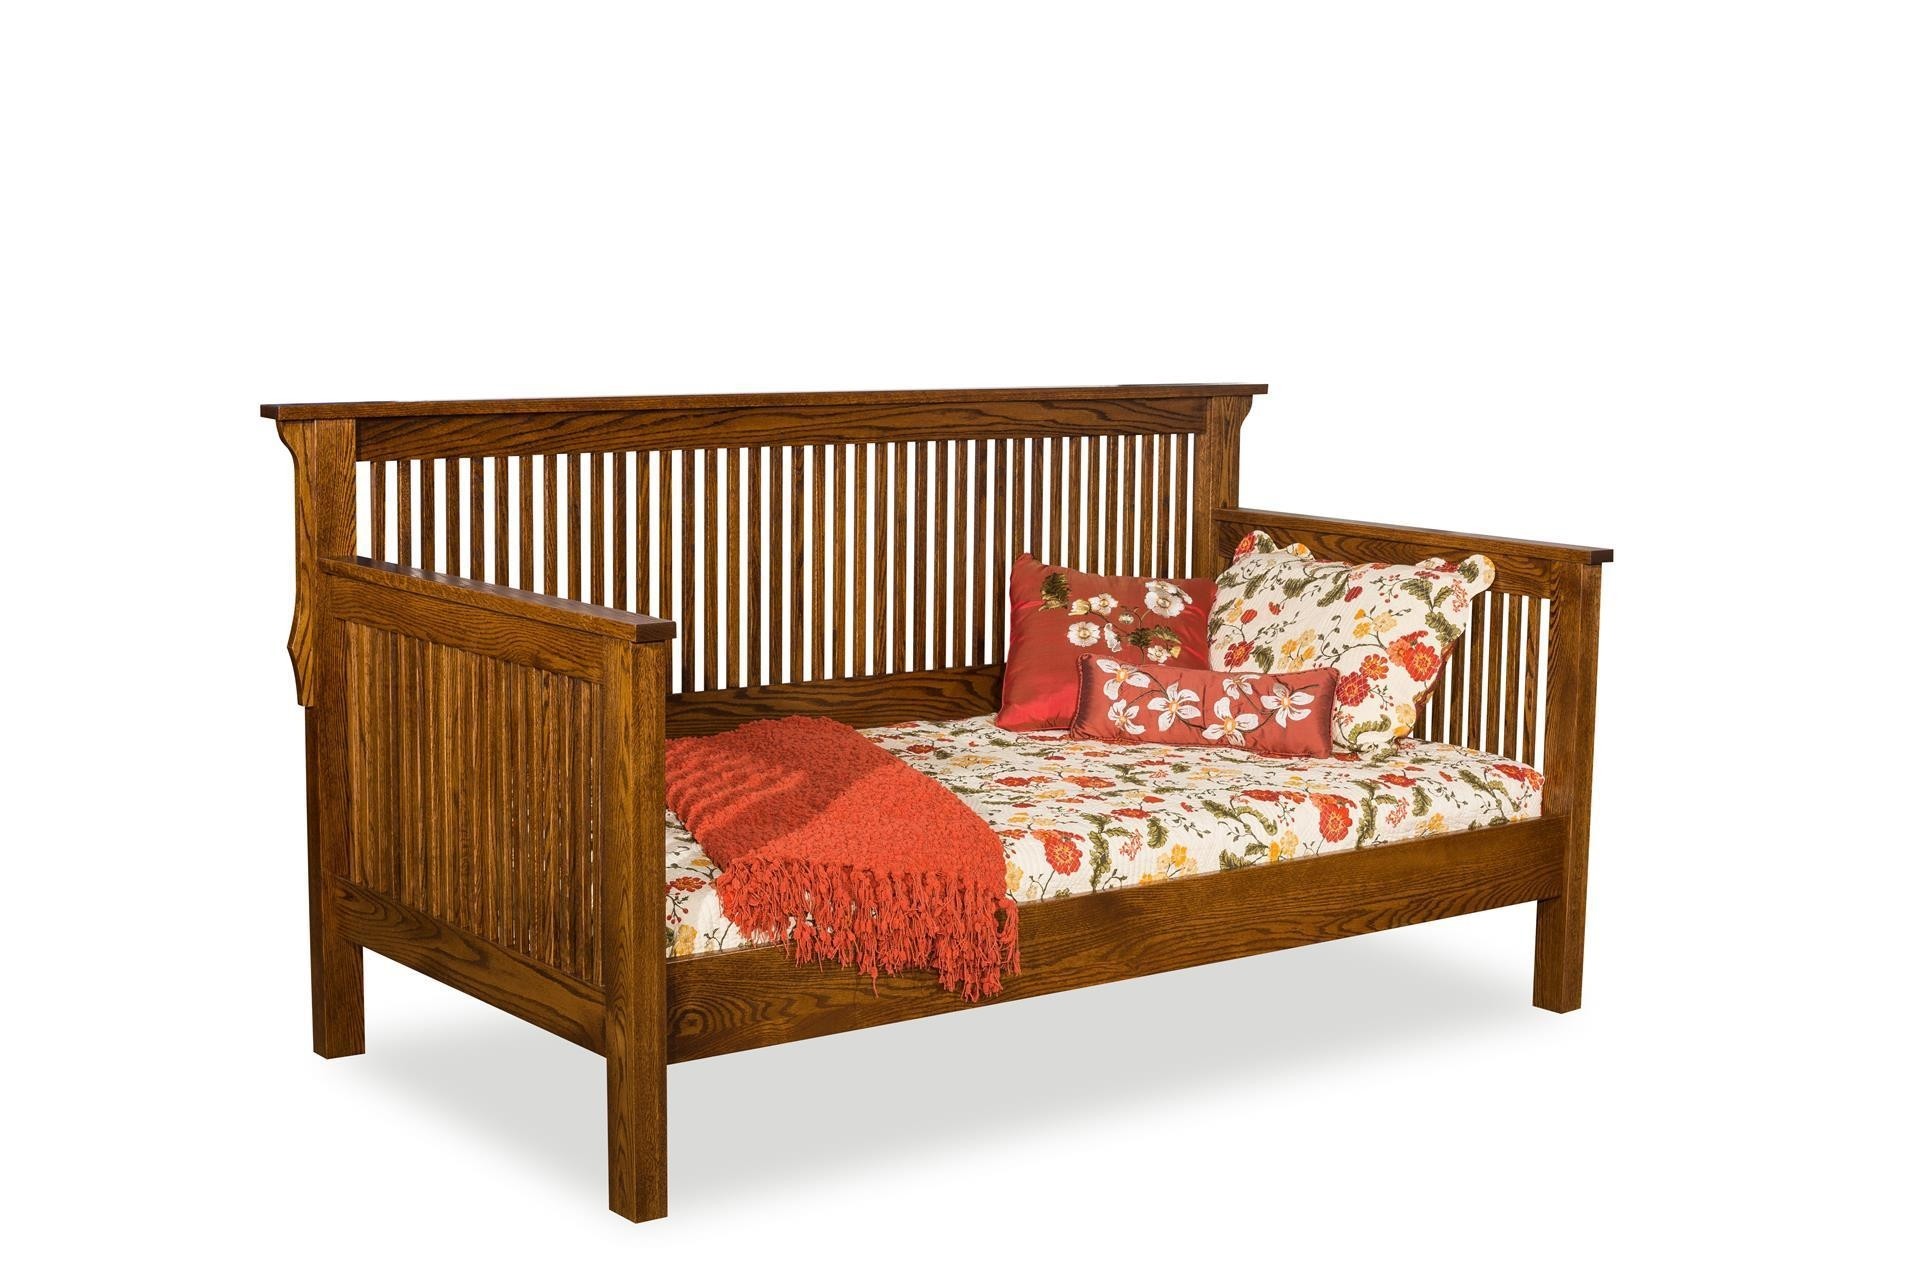 Mission day bed from dutchcrafters amish furniture